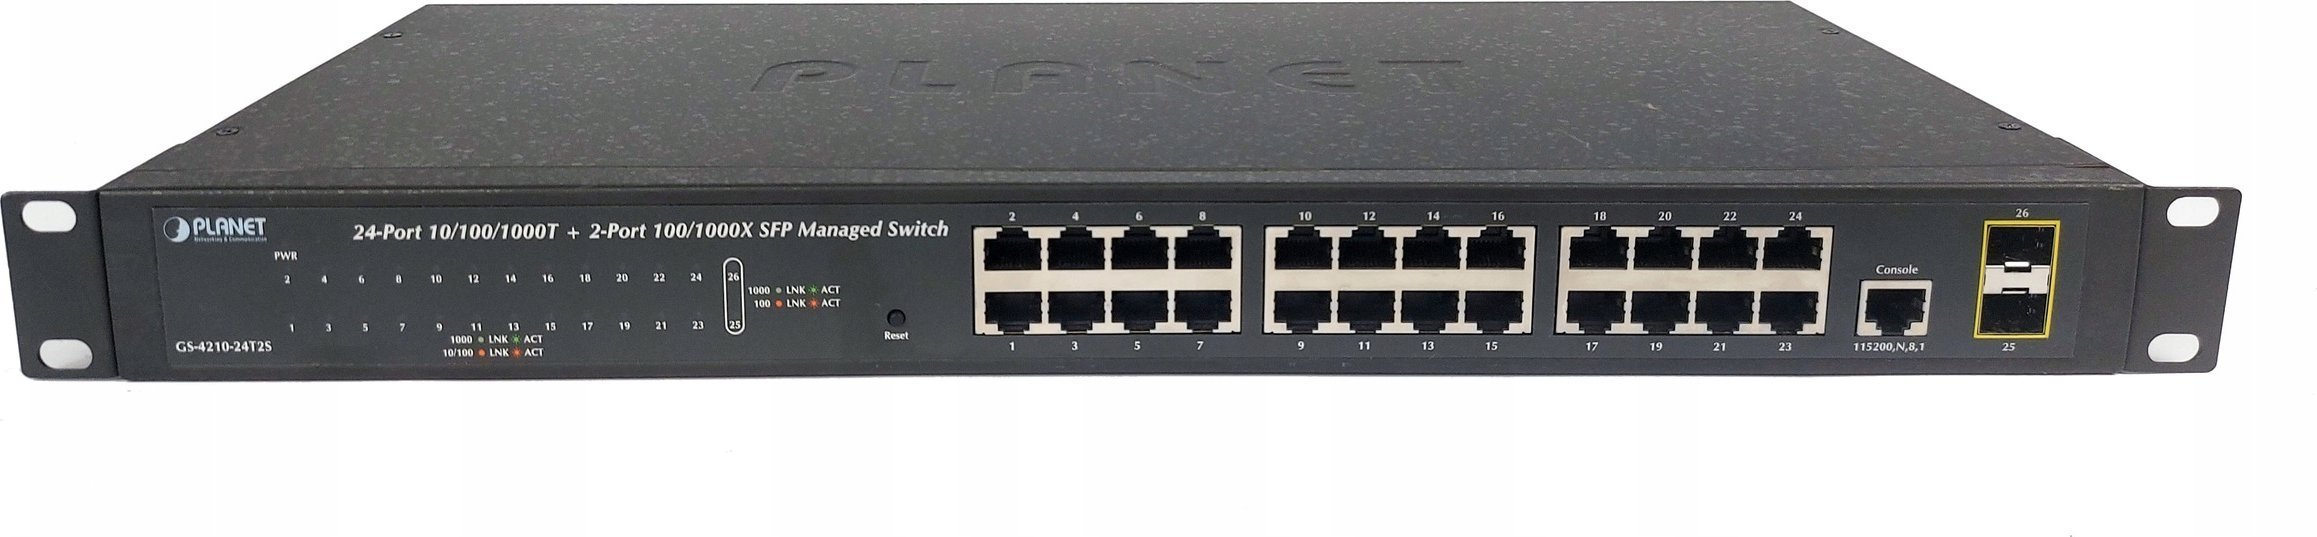 Switch-uri cu management - Switch PLANET GS-4210-24T2S 24-Port Layer 2 Managed Gigabit Ethernet Switch W/2 SFP Interfaces